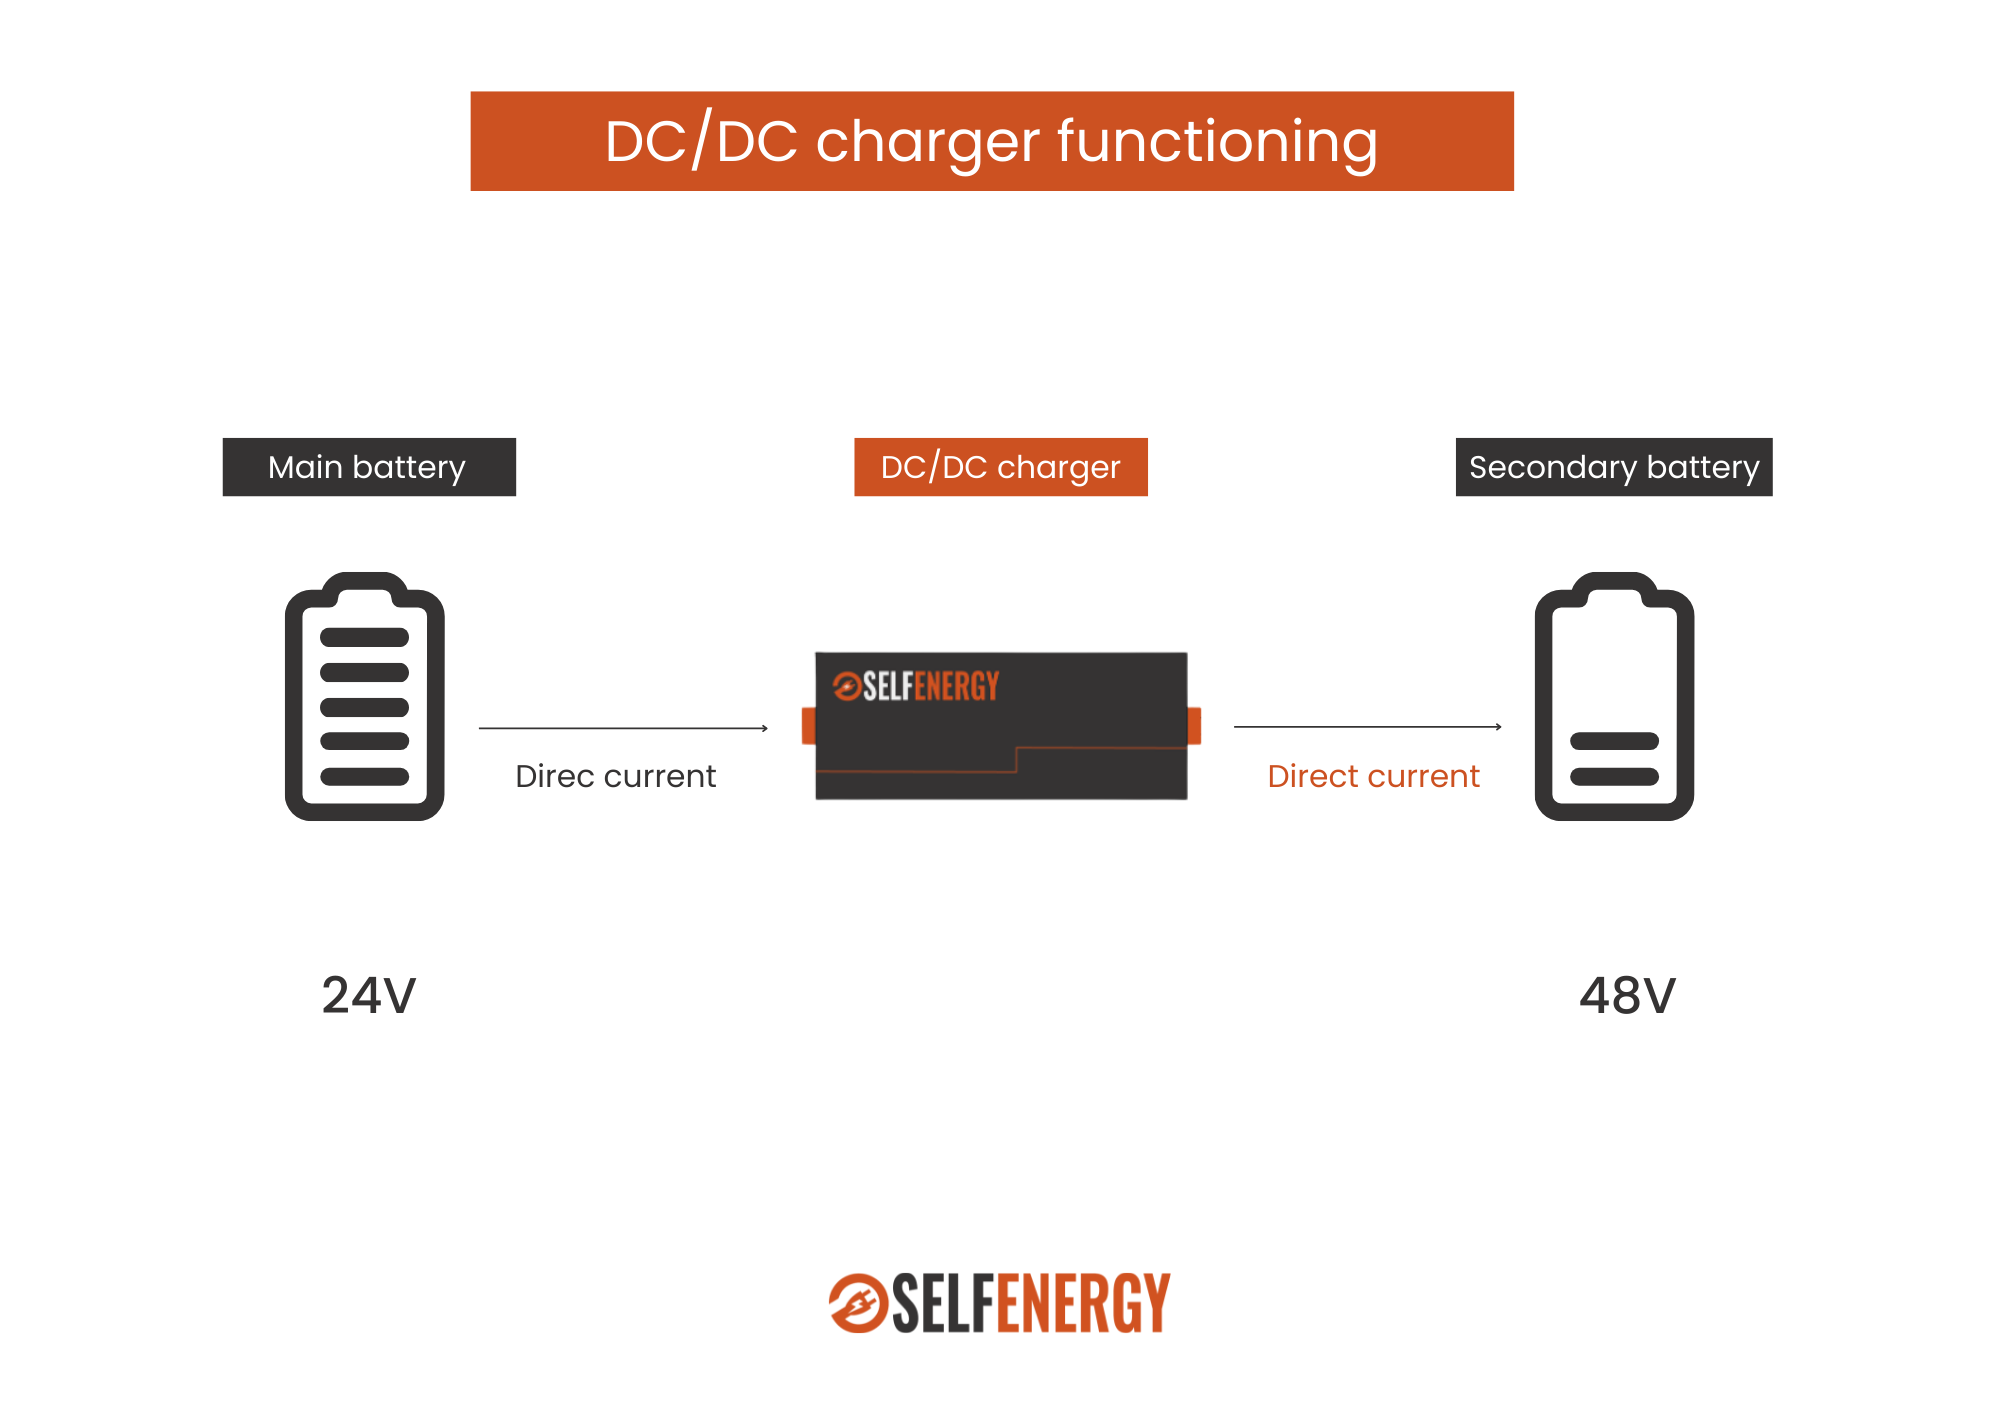 DC/DC charger functioning - Selfernergy